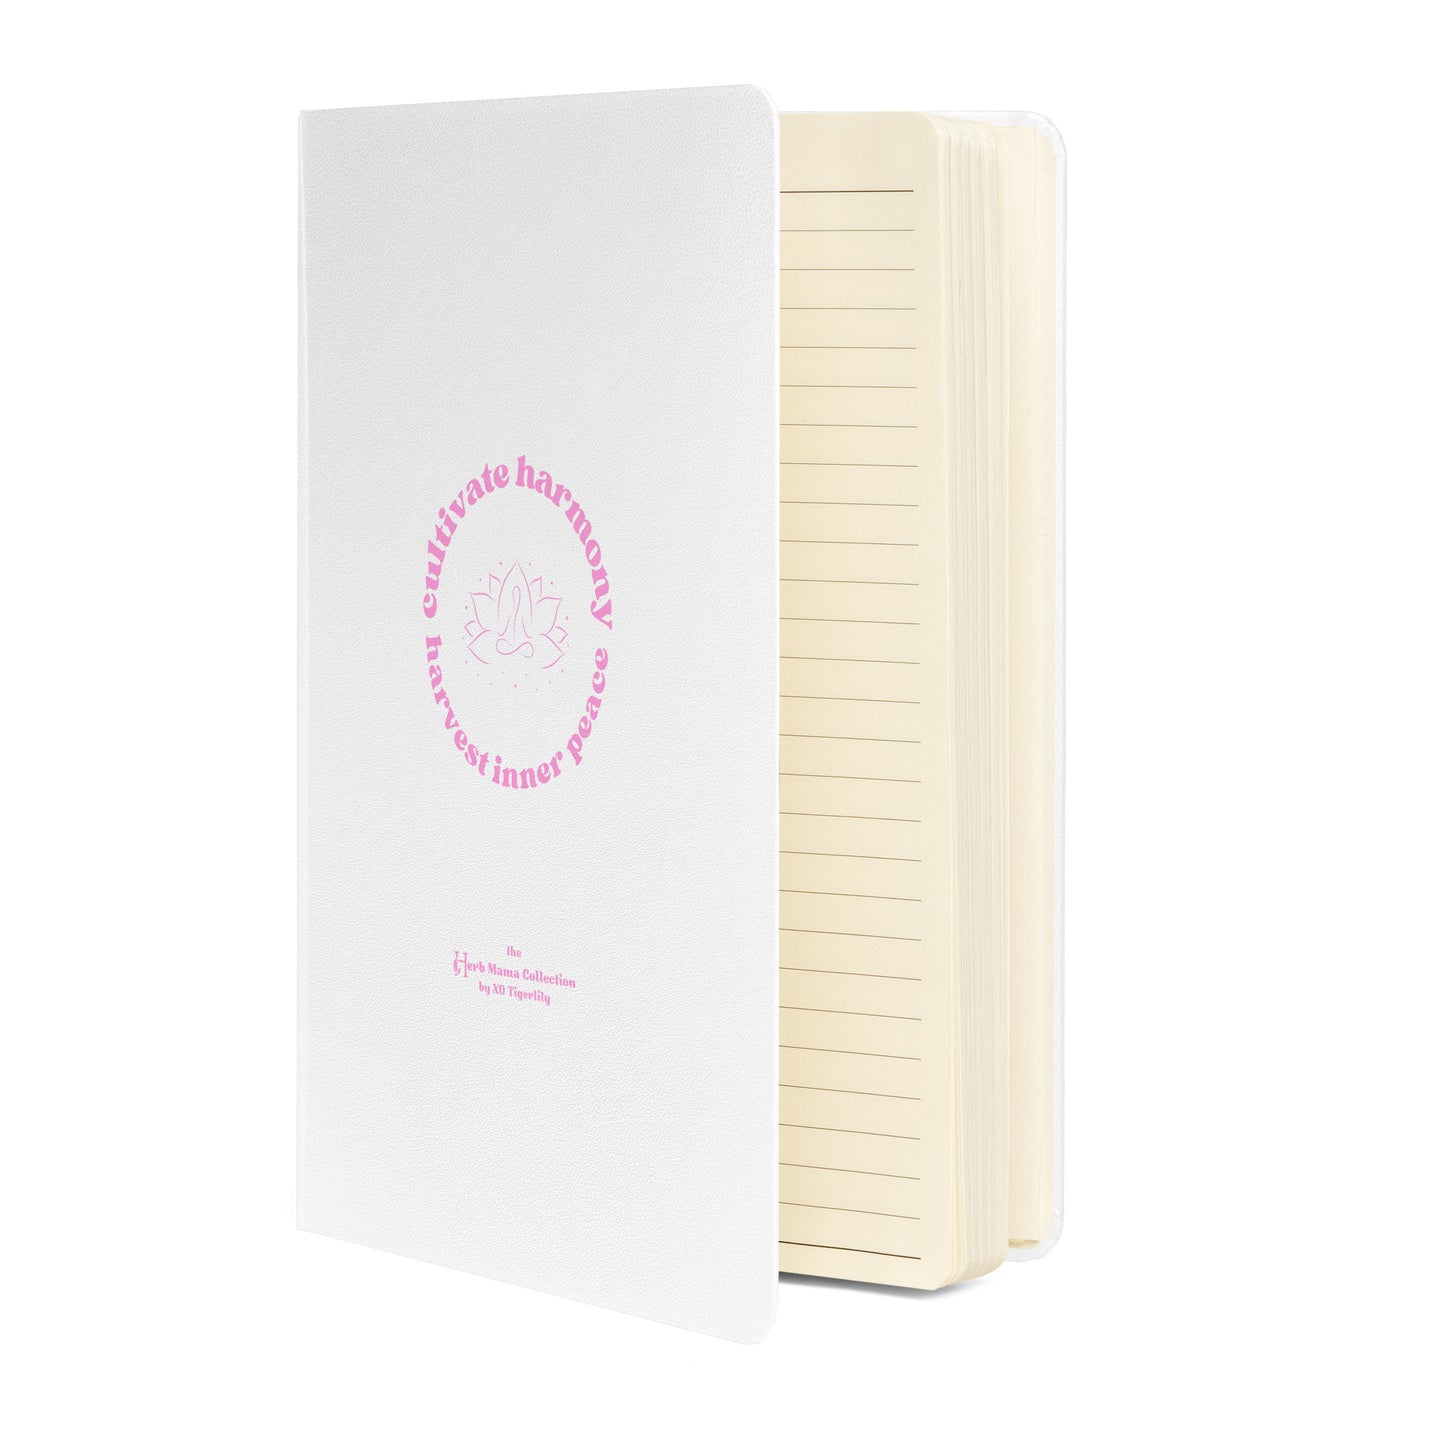 Cultivate Harmony Hardcover Journal